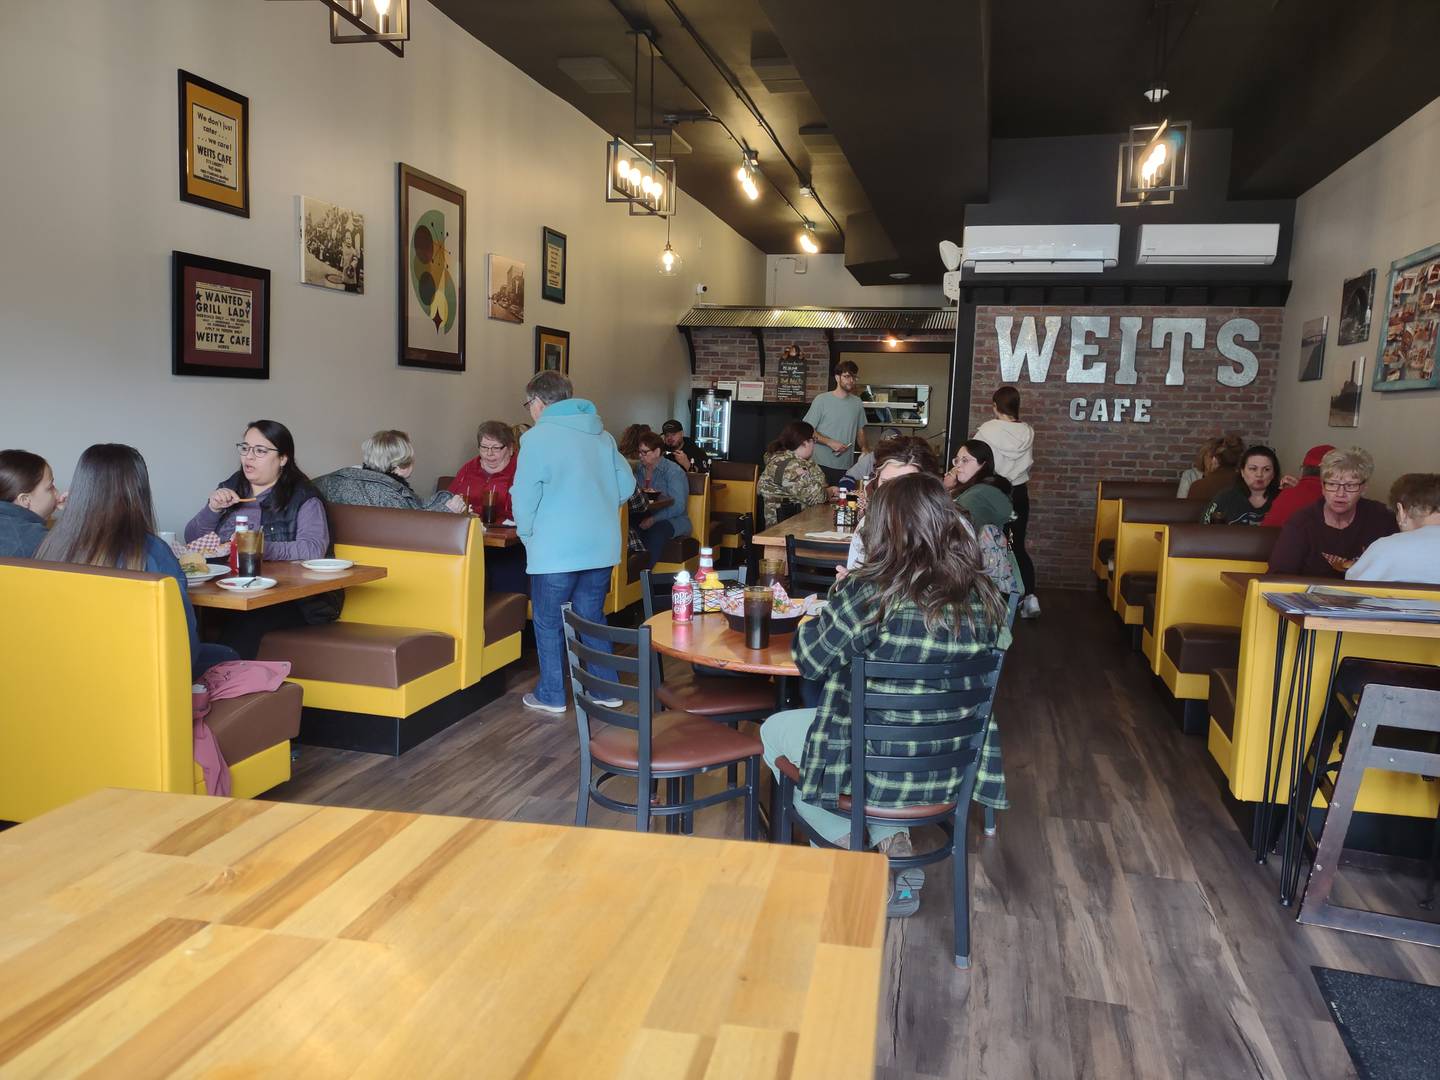 Diners sit at booths and tables and socialize at Weits Cafe in Morris.